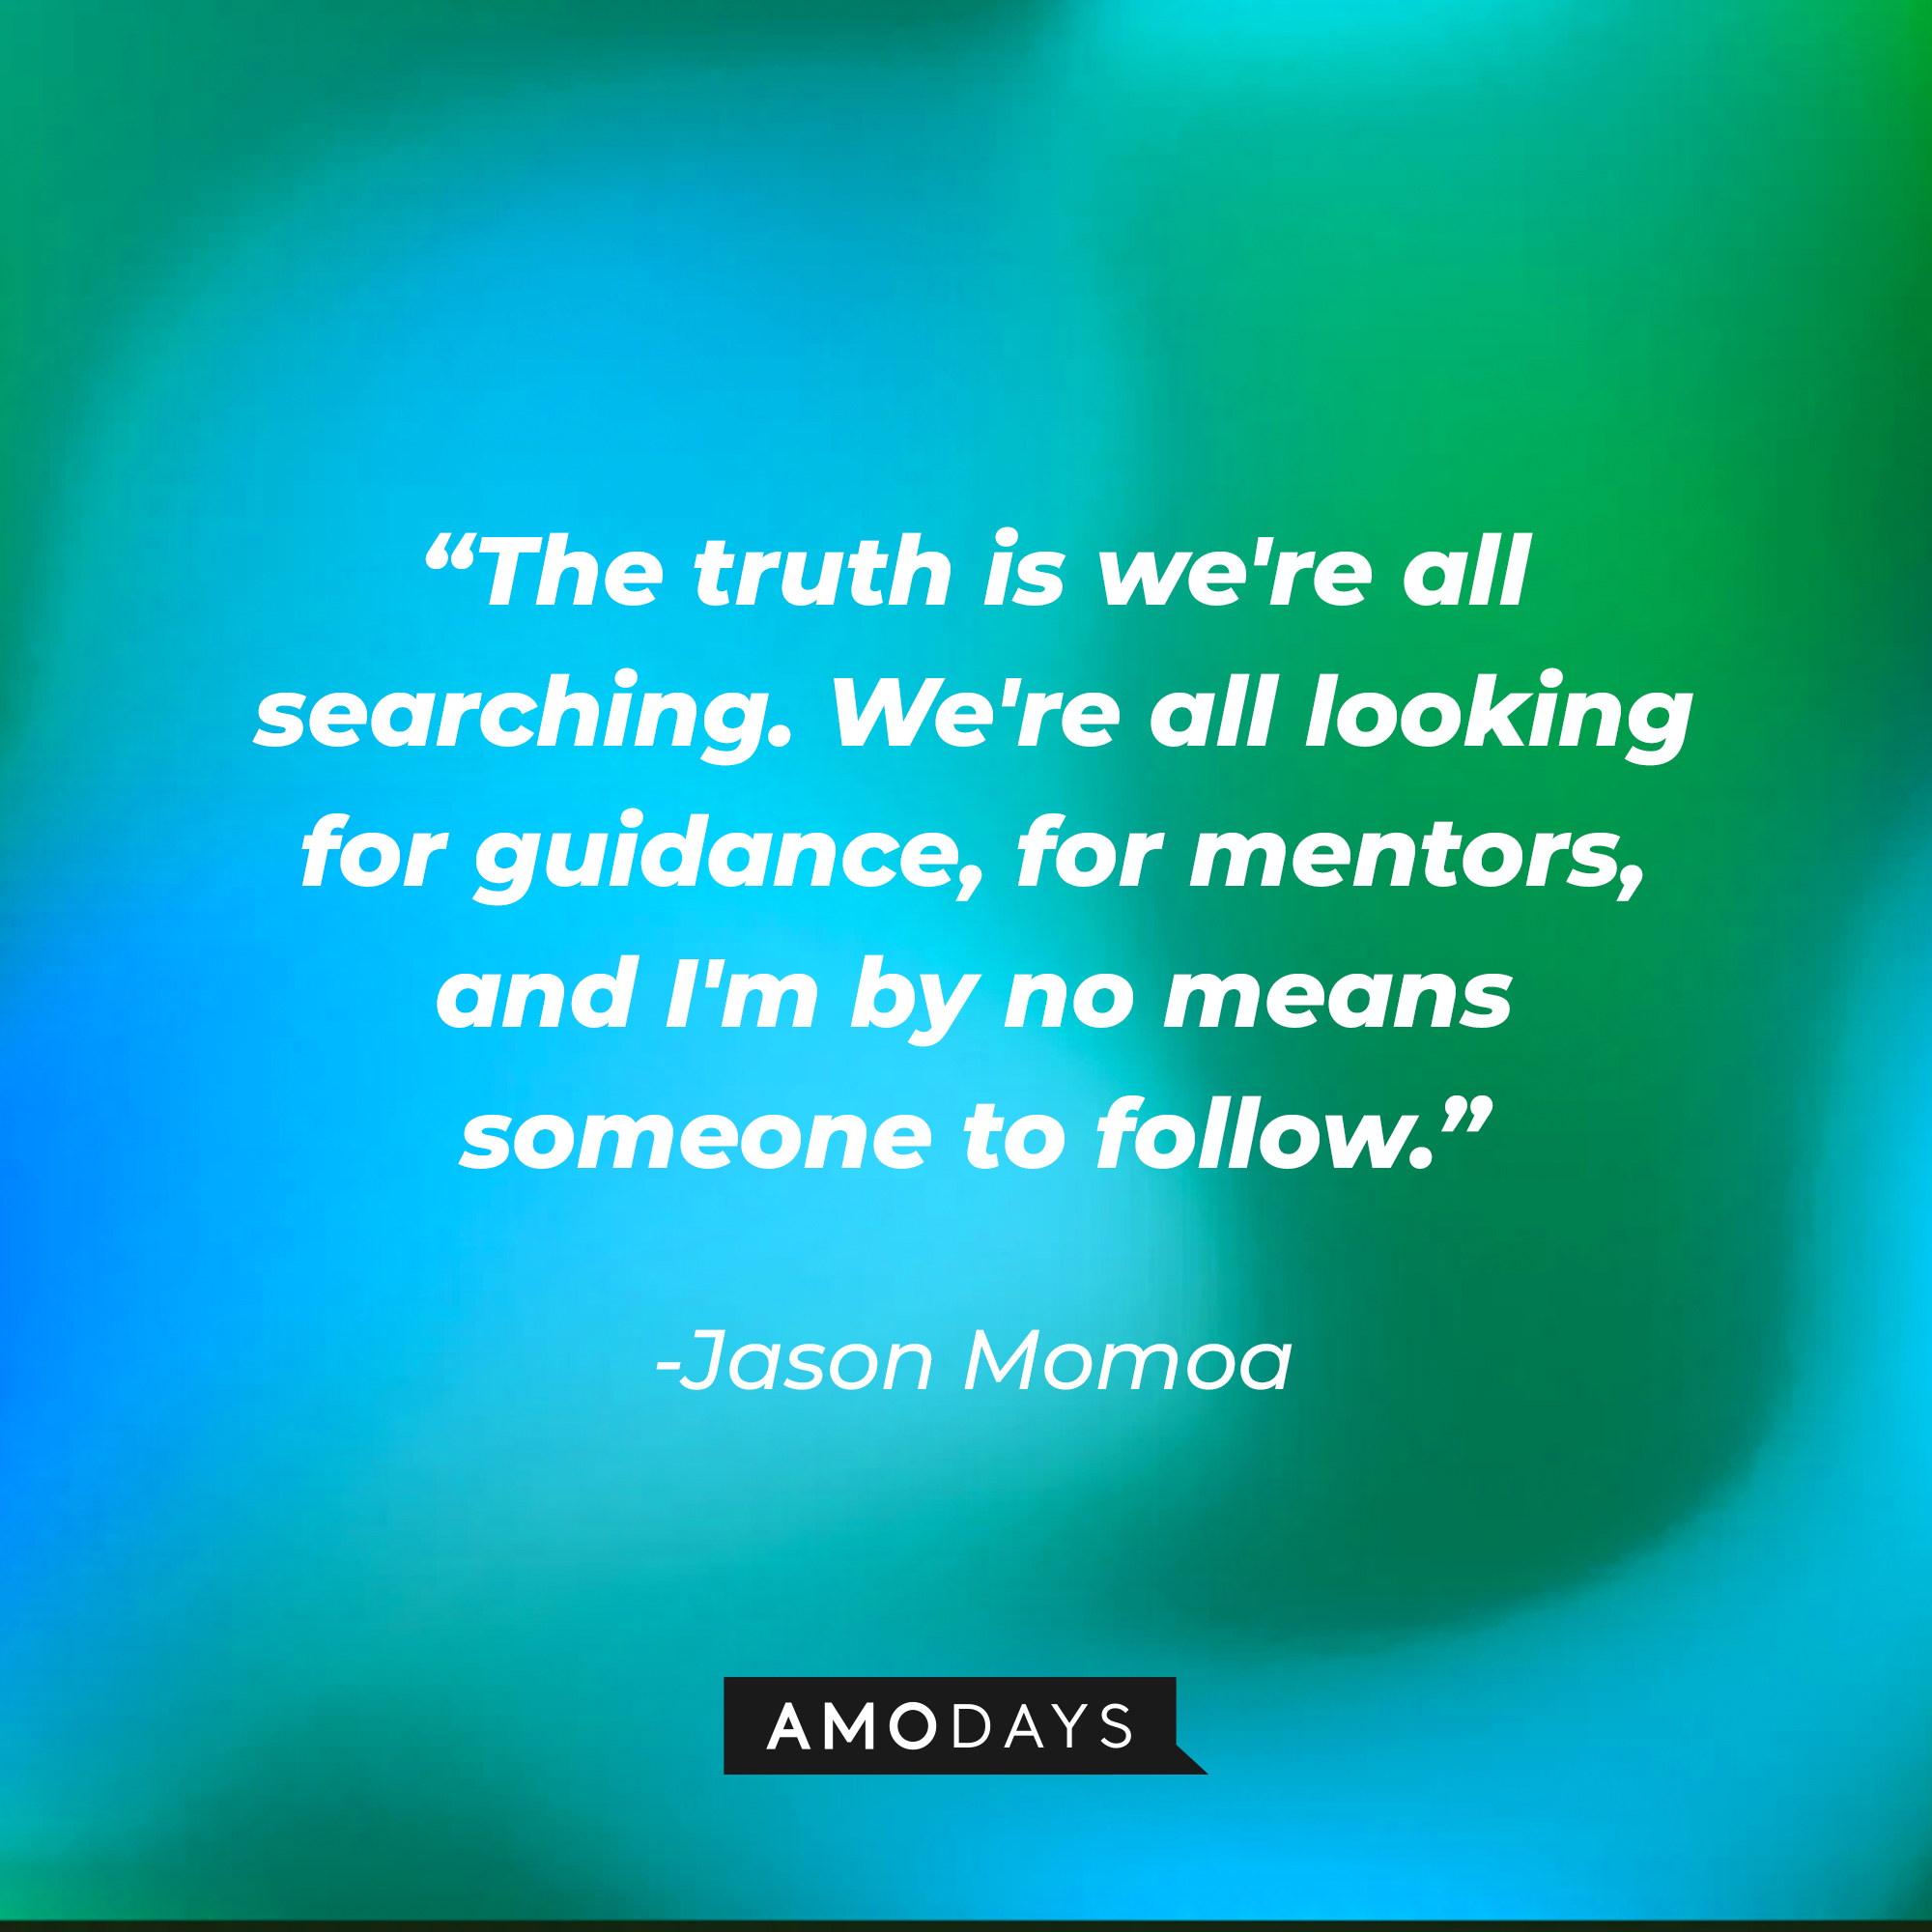 Jason Momoa's quote: “The truth is we're all searching. We're all looking for guidance, for mentors, and I'm by no means someone to follow.” | Source: Amodays